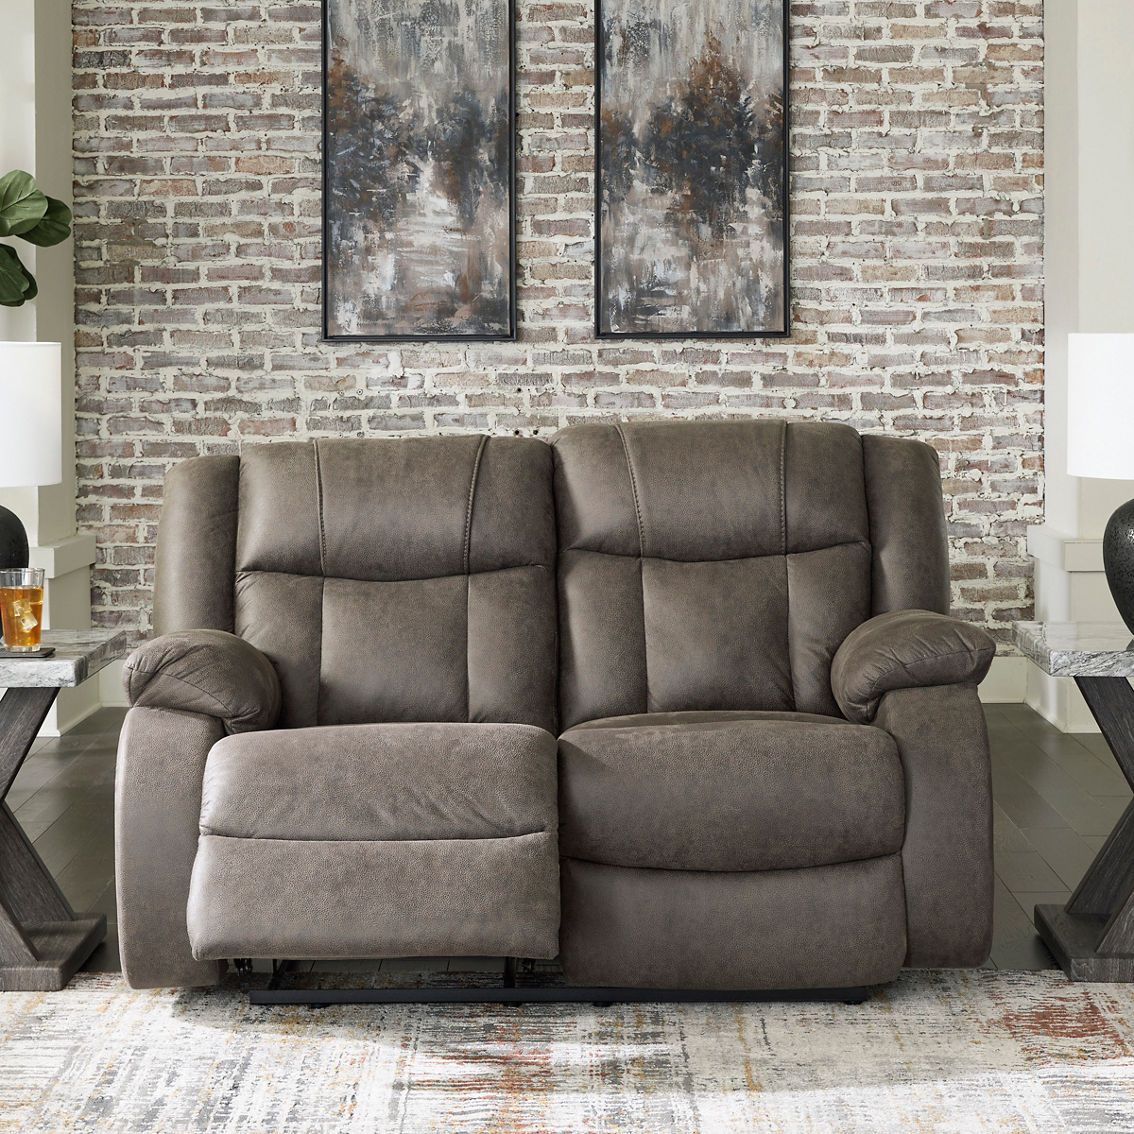 Signature Design by Ashley First Base 2 pc. Reclining Set: Sofa, Loveseat - Image 3 of 4